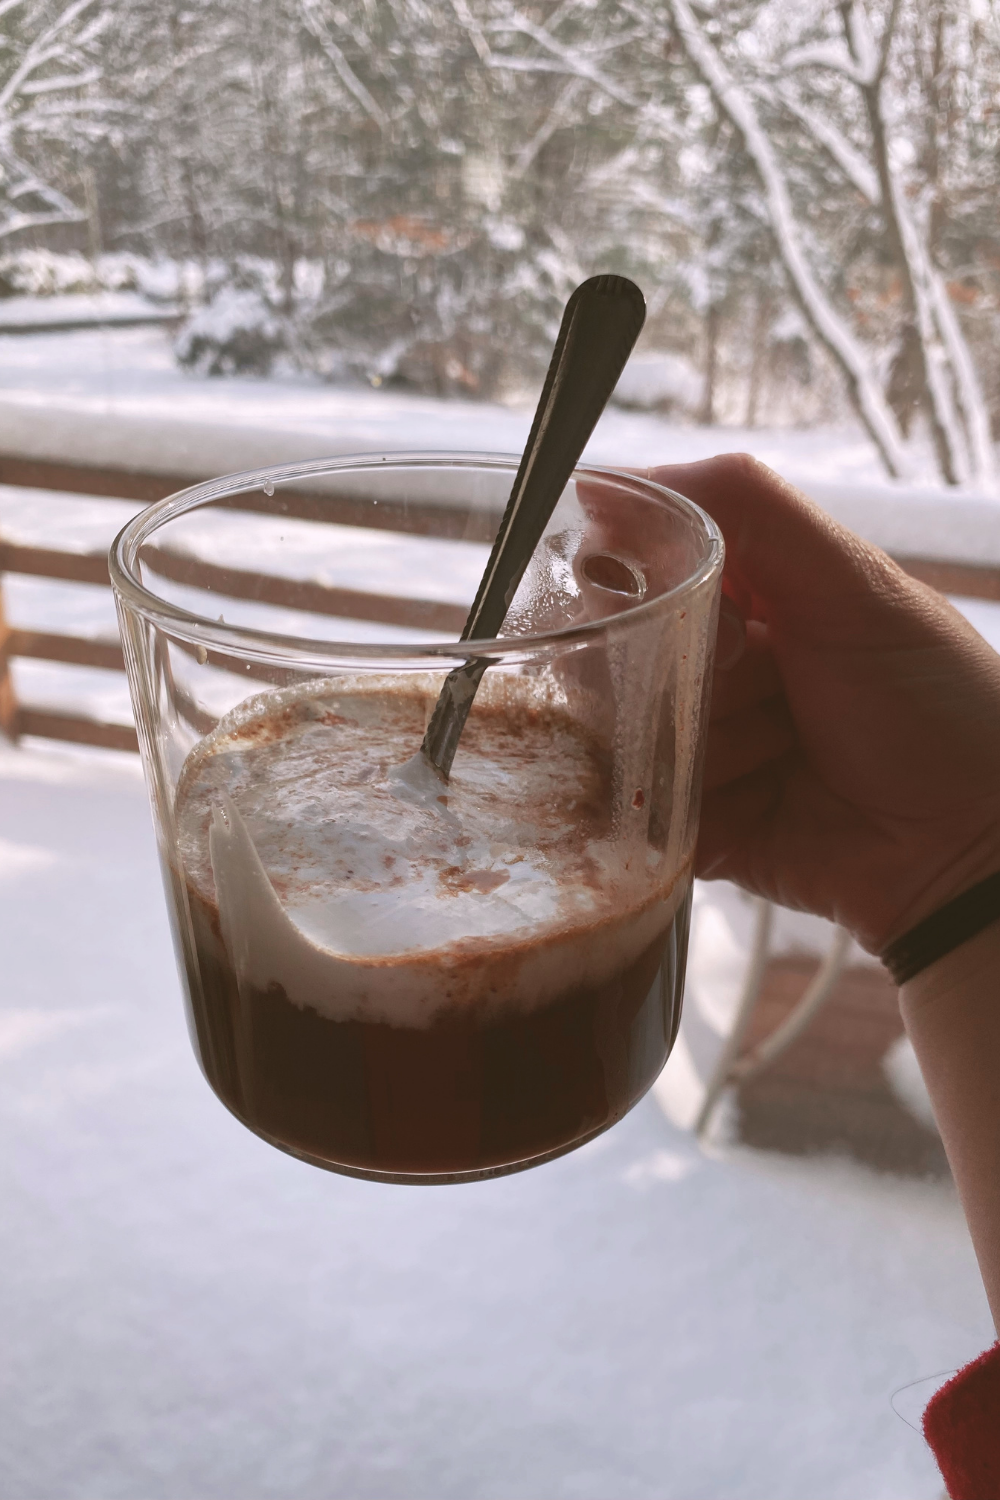 How To Make Vegan Hot Chocolate From Scratch